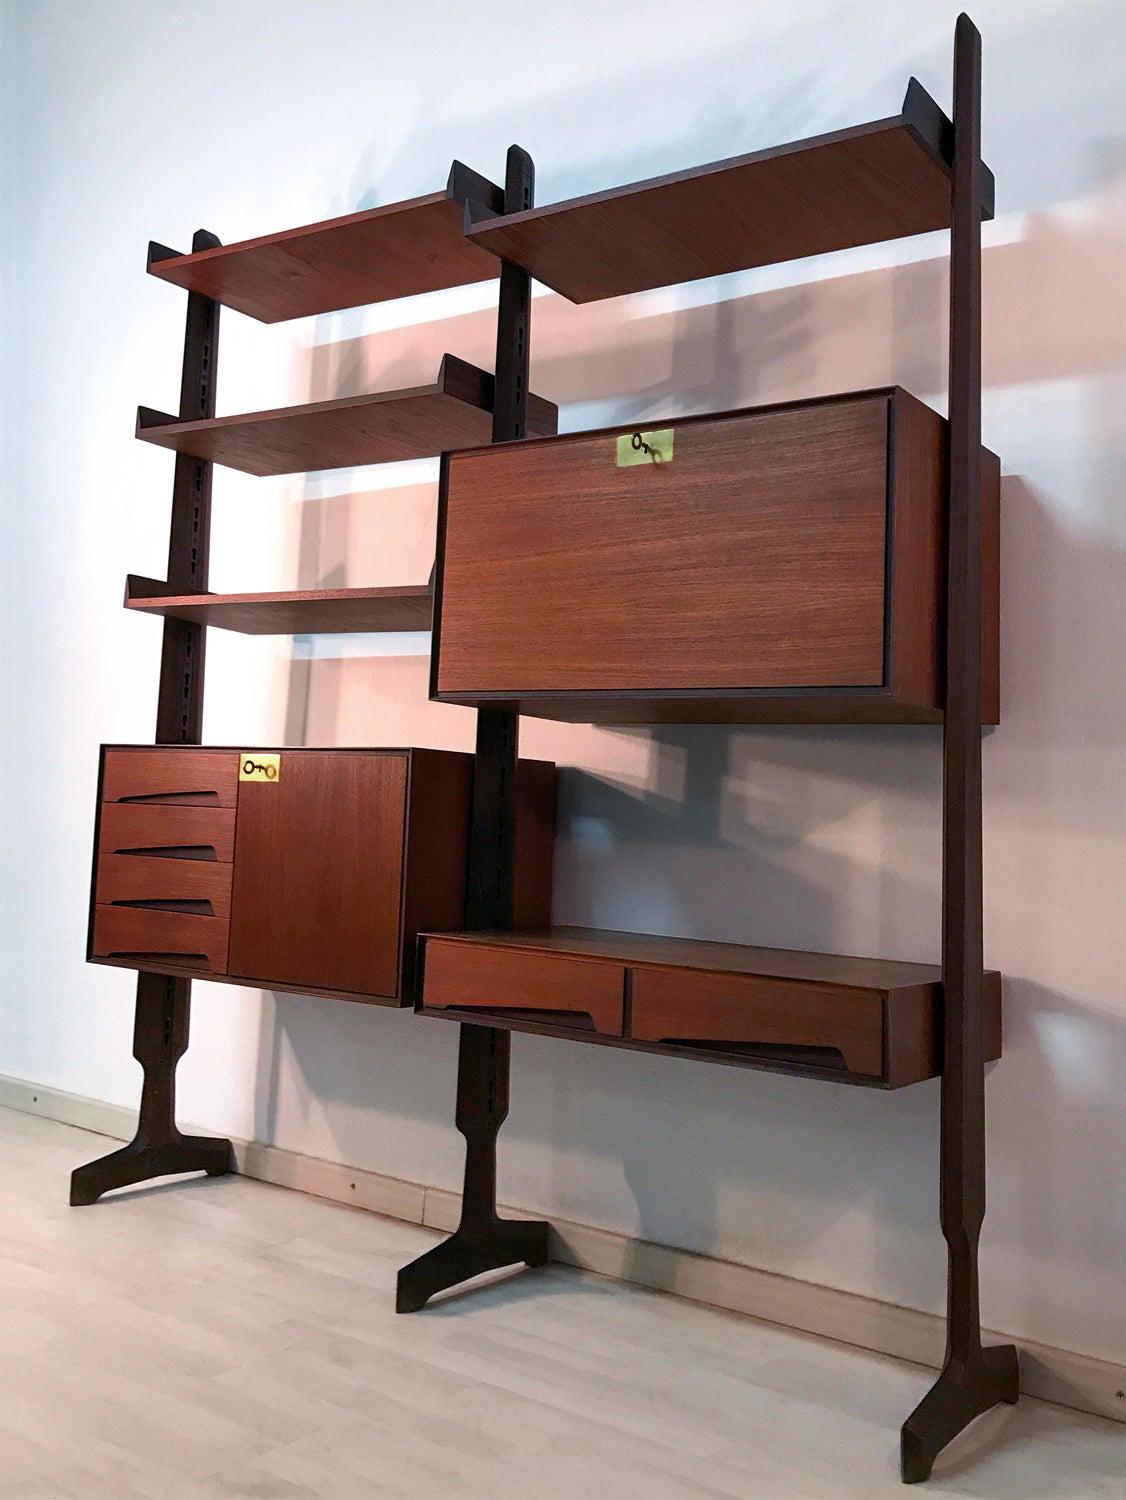 This bookcase is composed by 2 modules freestanding, suitable to be moving and placed at will in the home.
It's equipped with four shelves, one cabinet with drop-leaf door available as secretaire, one cabinet with door and drawers and also the